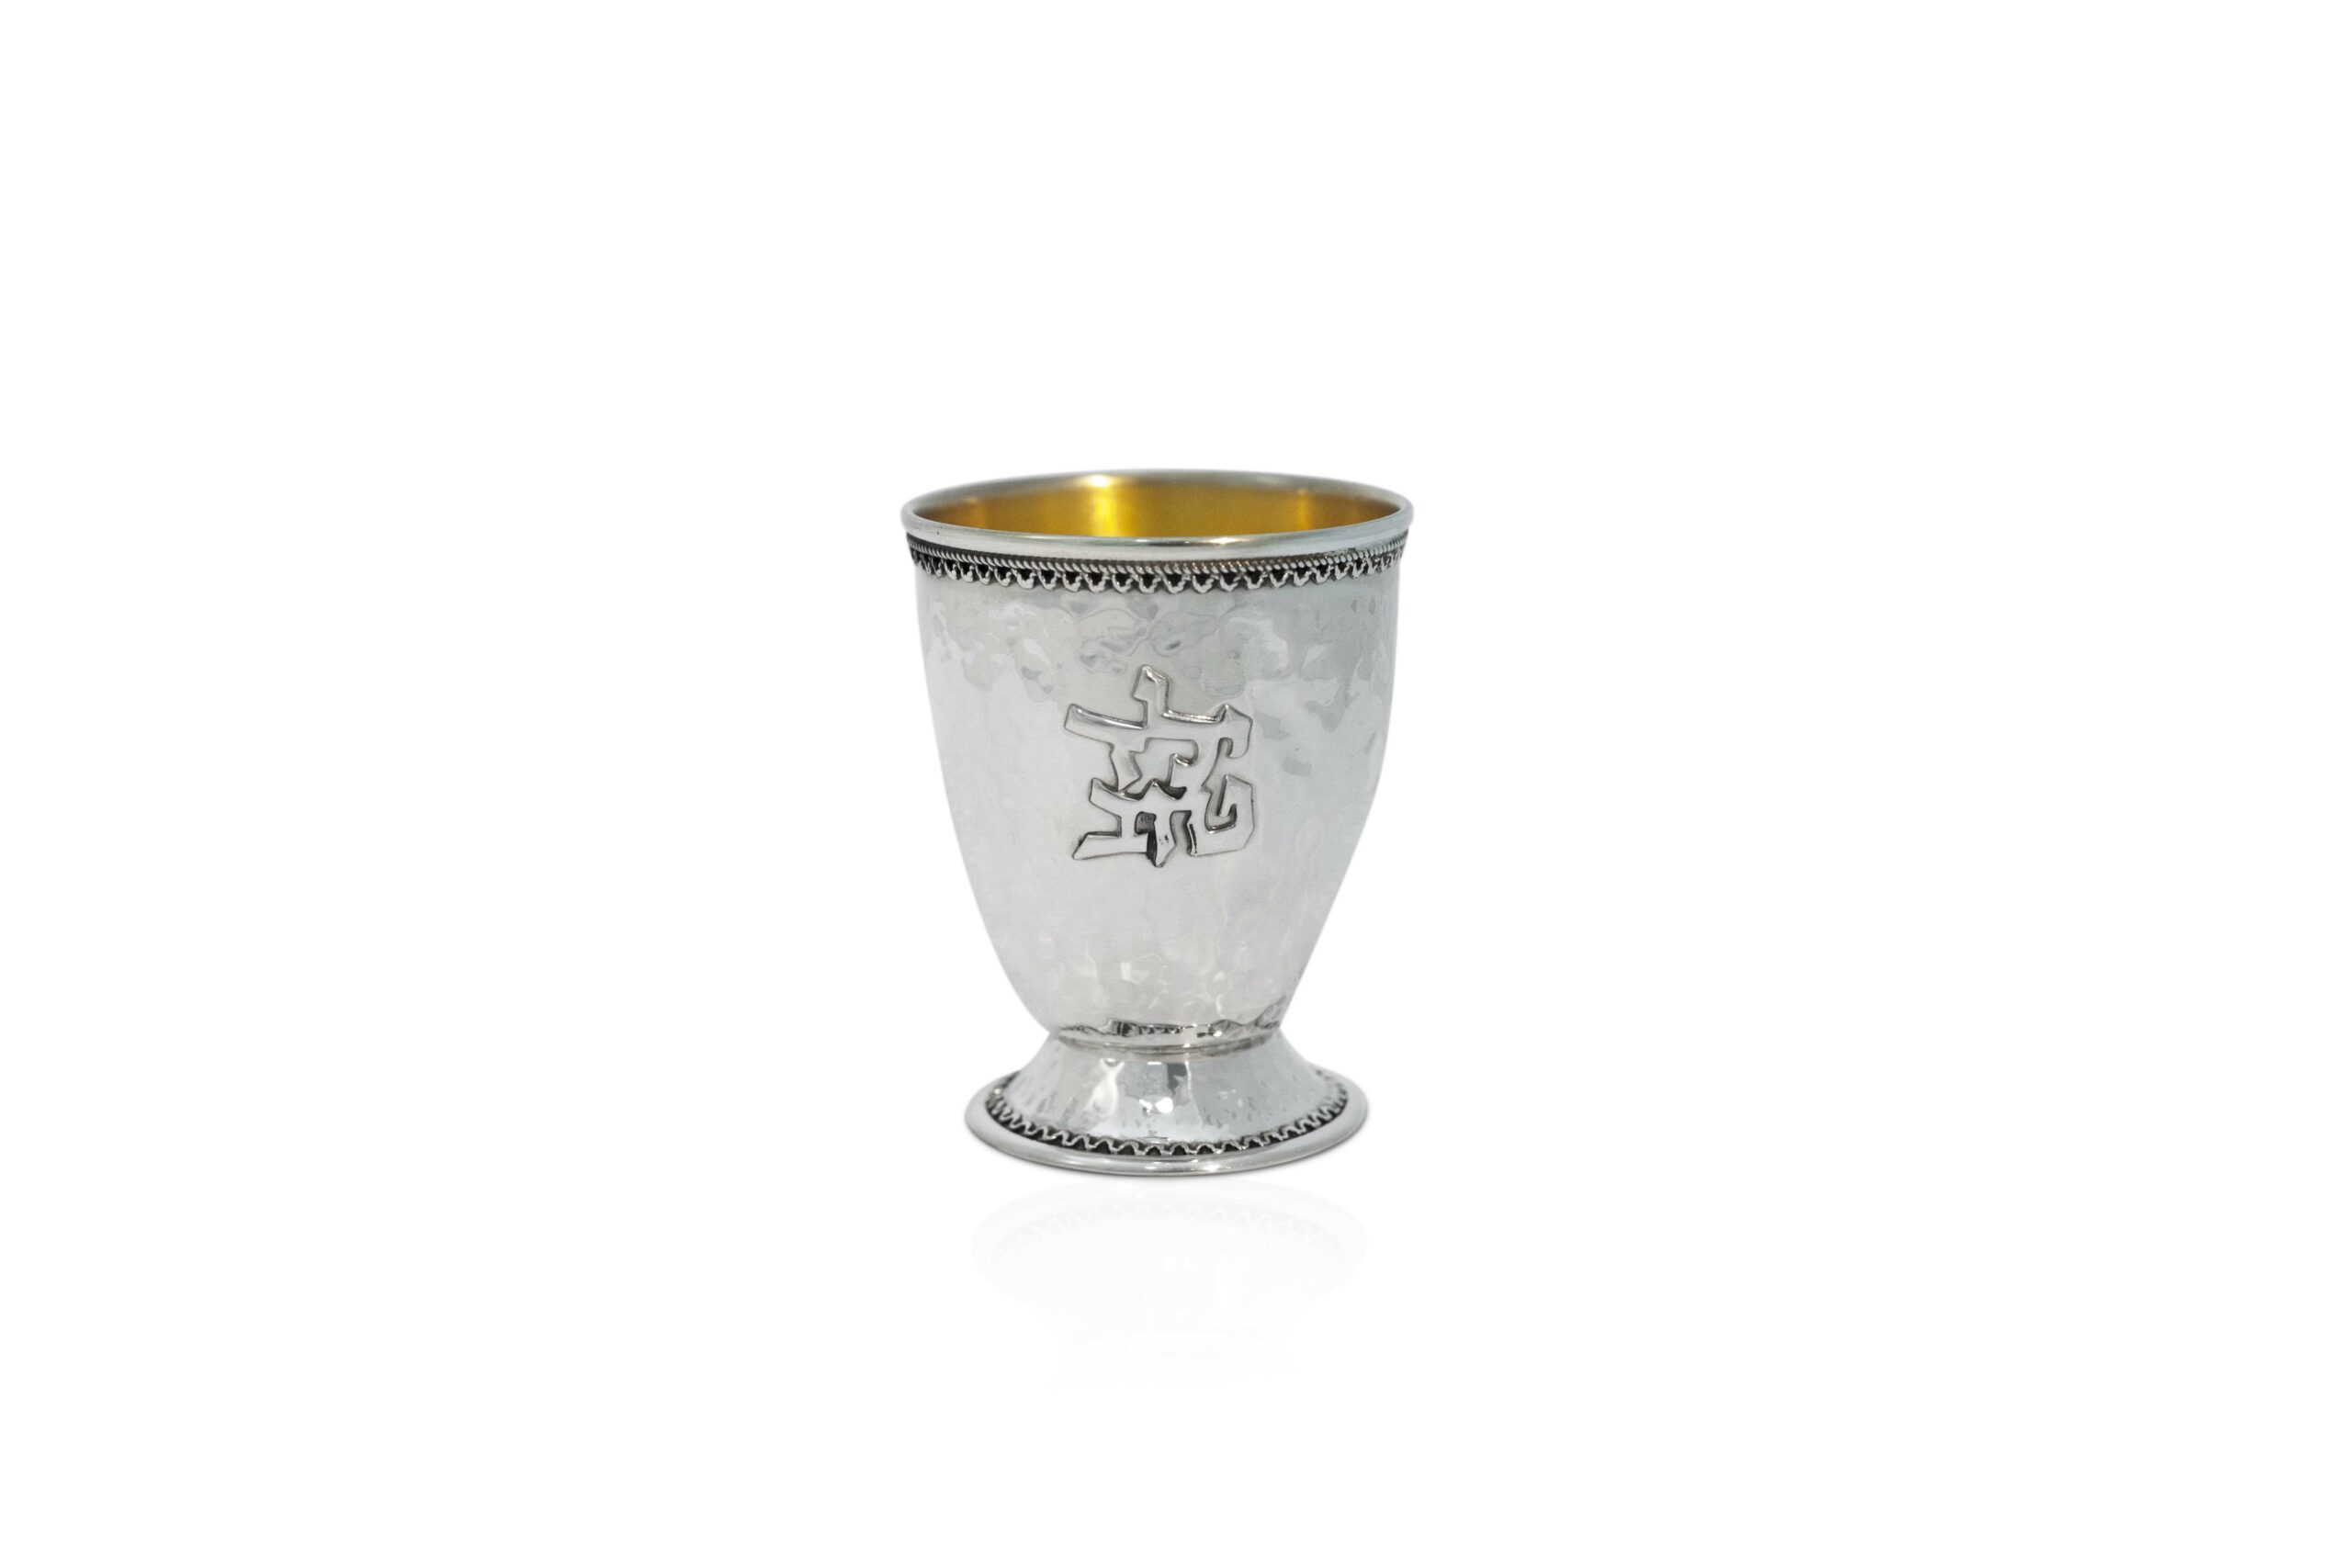 Hammered Yeled Tov Kiddush Cup made of Sterling Silver with Filigree Rim